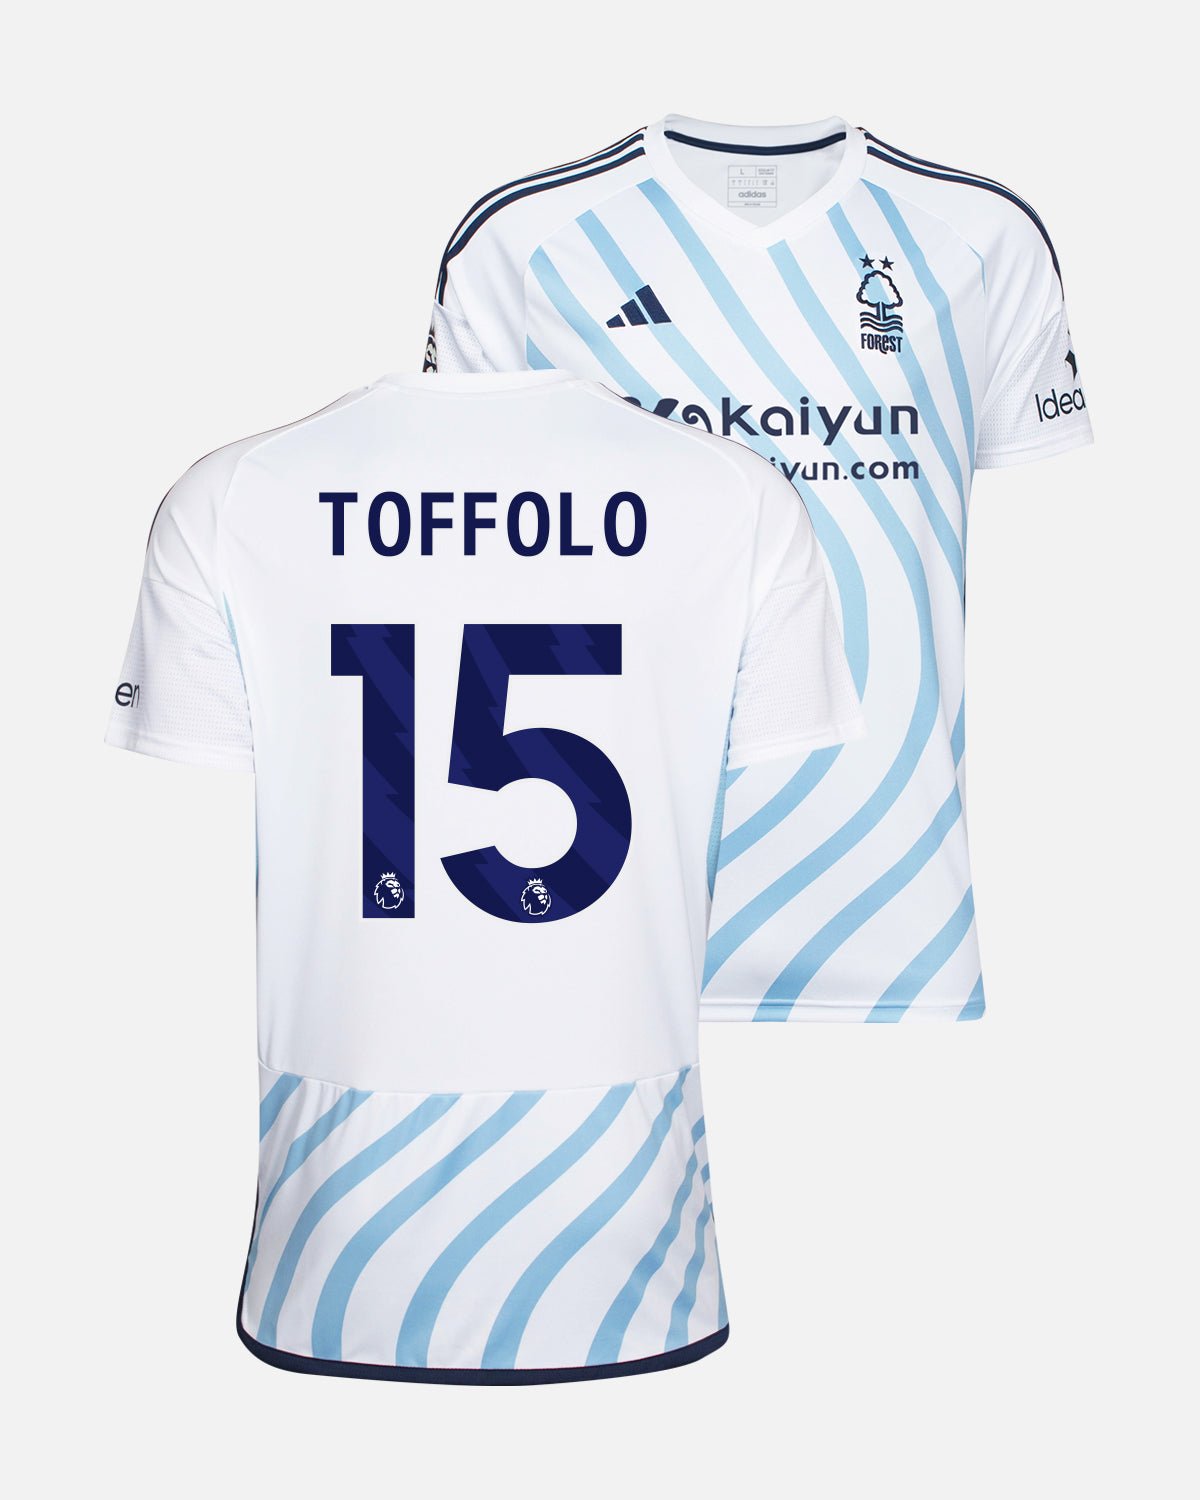 NFFC Away Shirt 23-24 - Toffolo 15 - Nottingham Forest FC